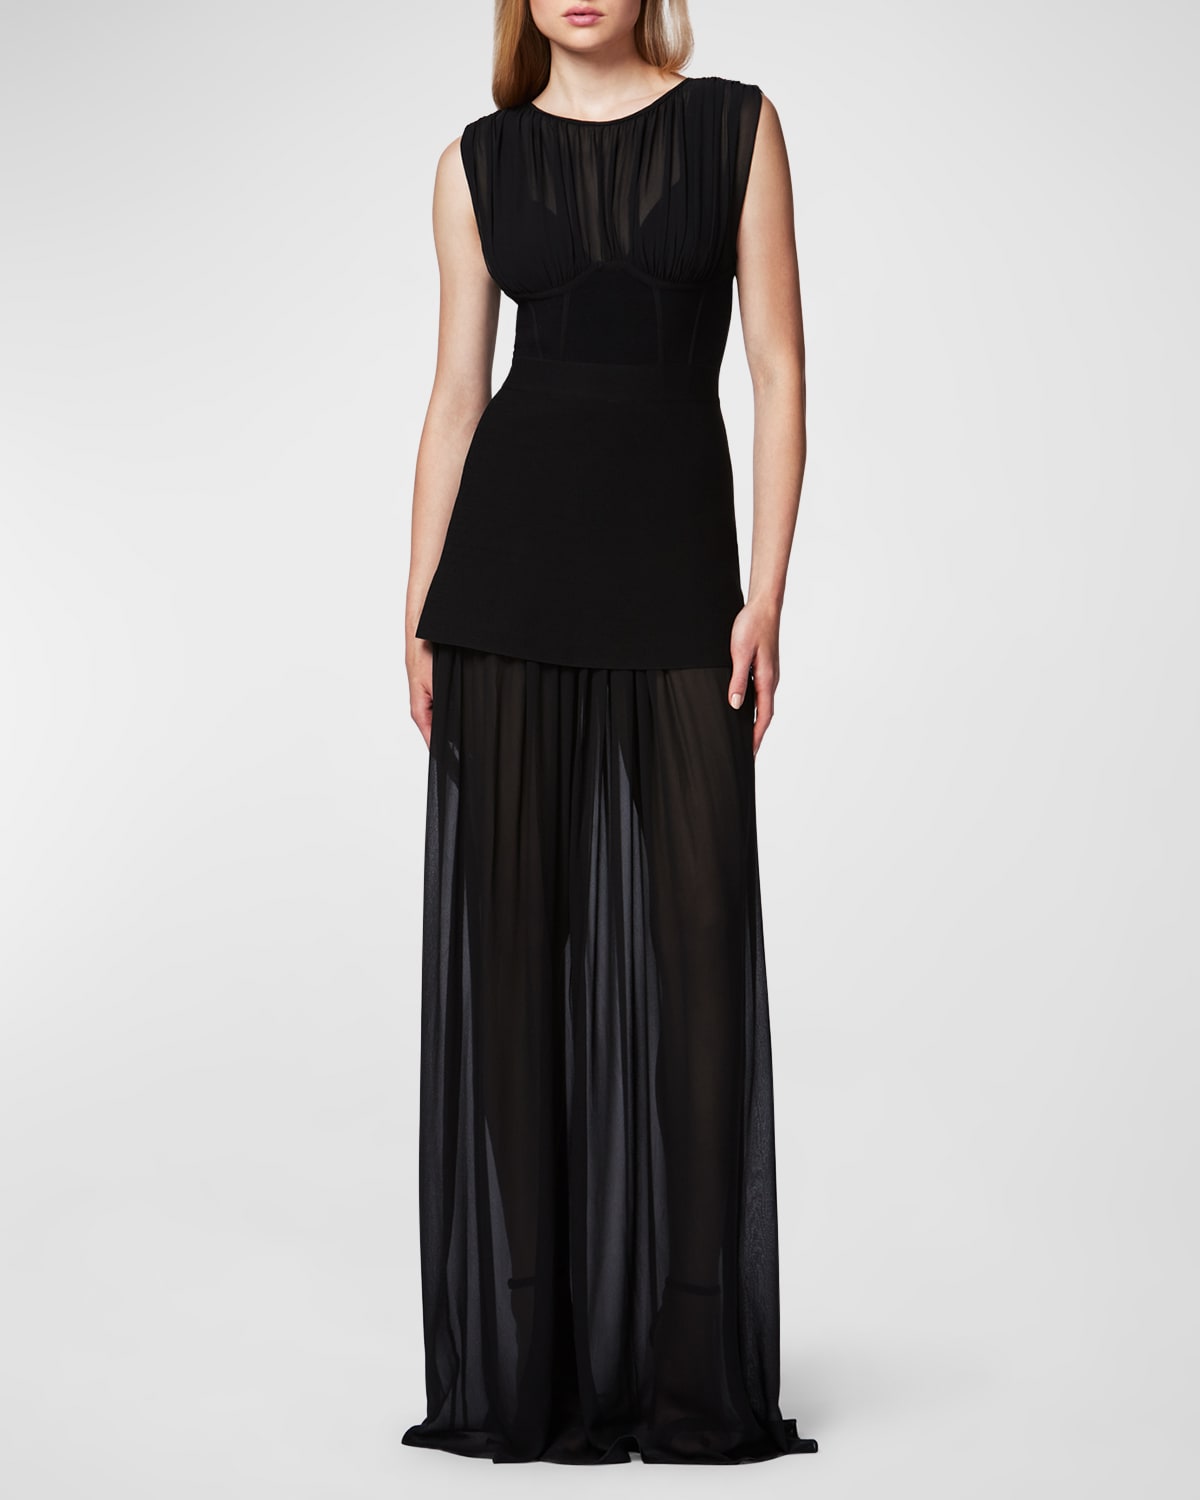 HERVE LEGER RUCHED CHIFFON SLEEVELESS MILANO CORSET GOWN